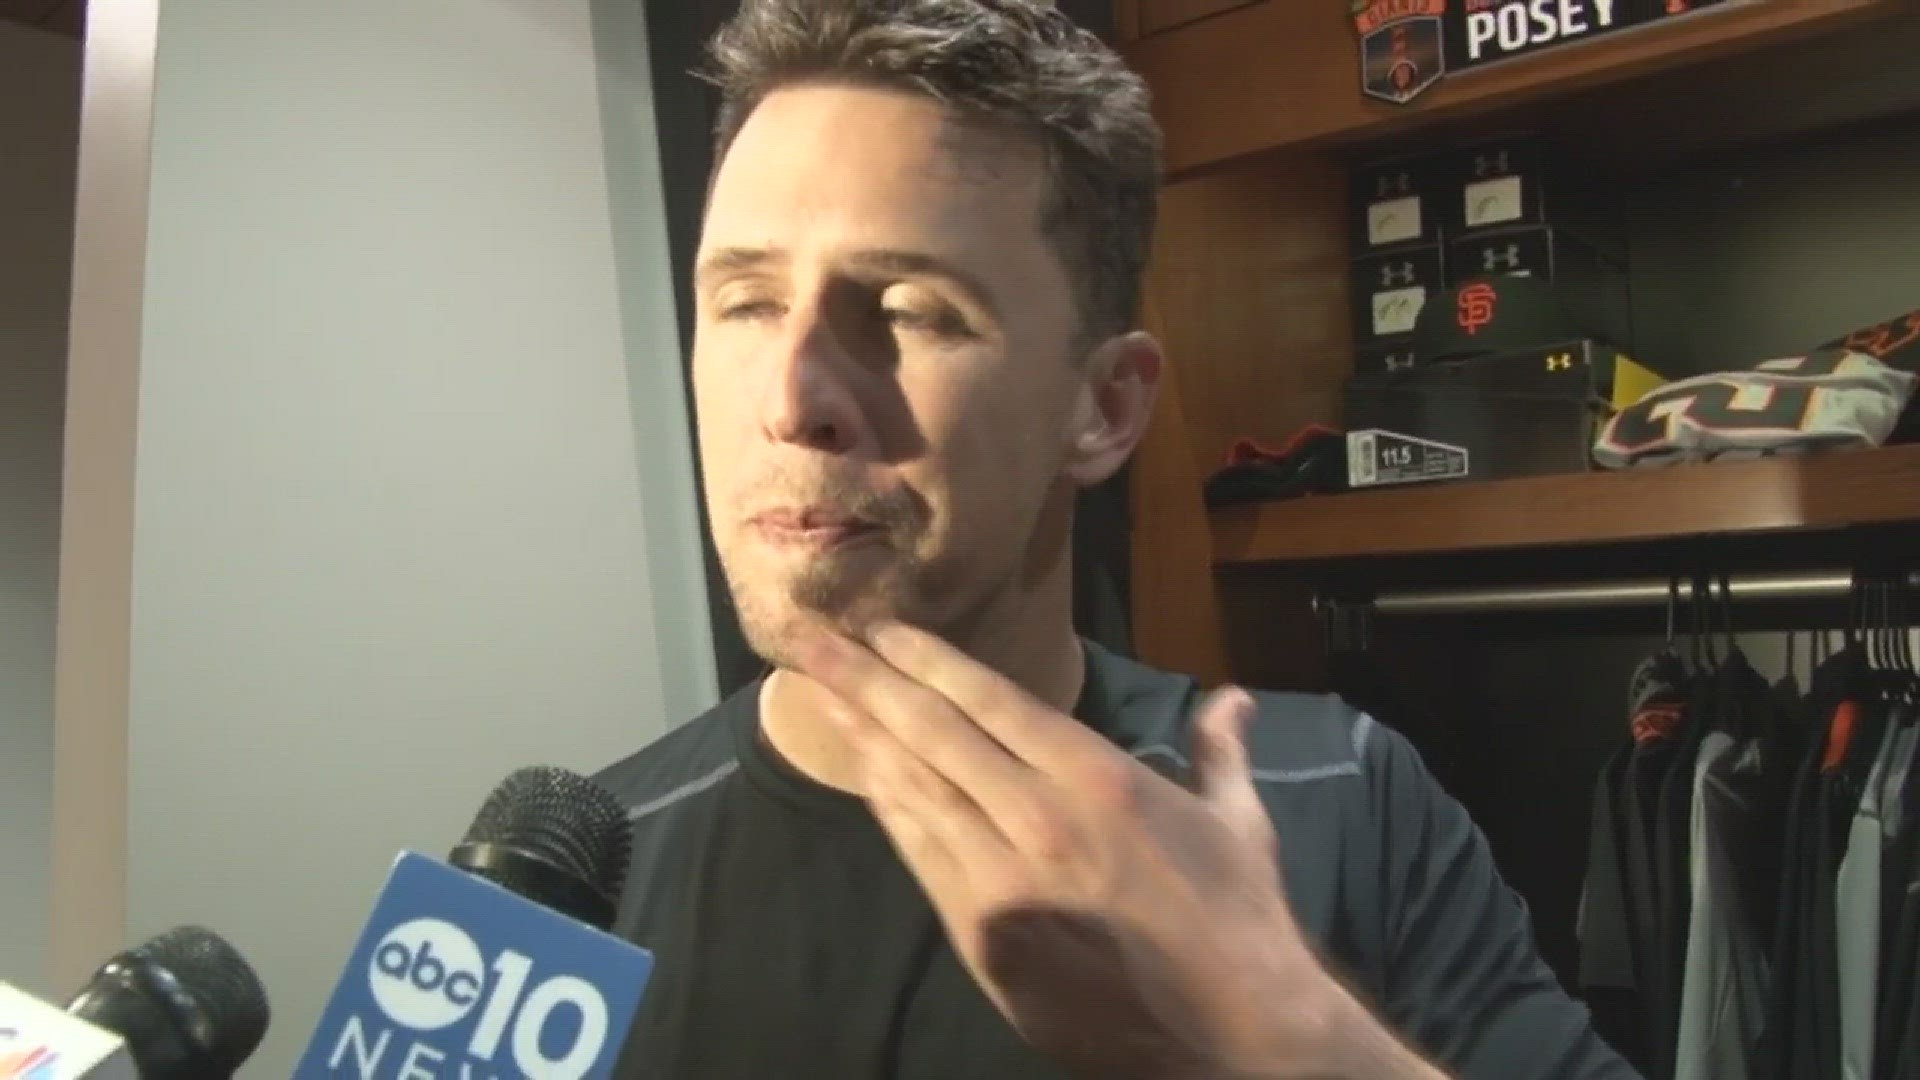 San Francisco Giants' catcher Buster Posey discusses his team's hot-hitting throughout the entire lineup and the excitement from another Opening Day at AT&T Park, which resulted in a win over the rival Los Angeles Dodgers, on Thursday.